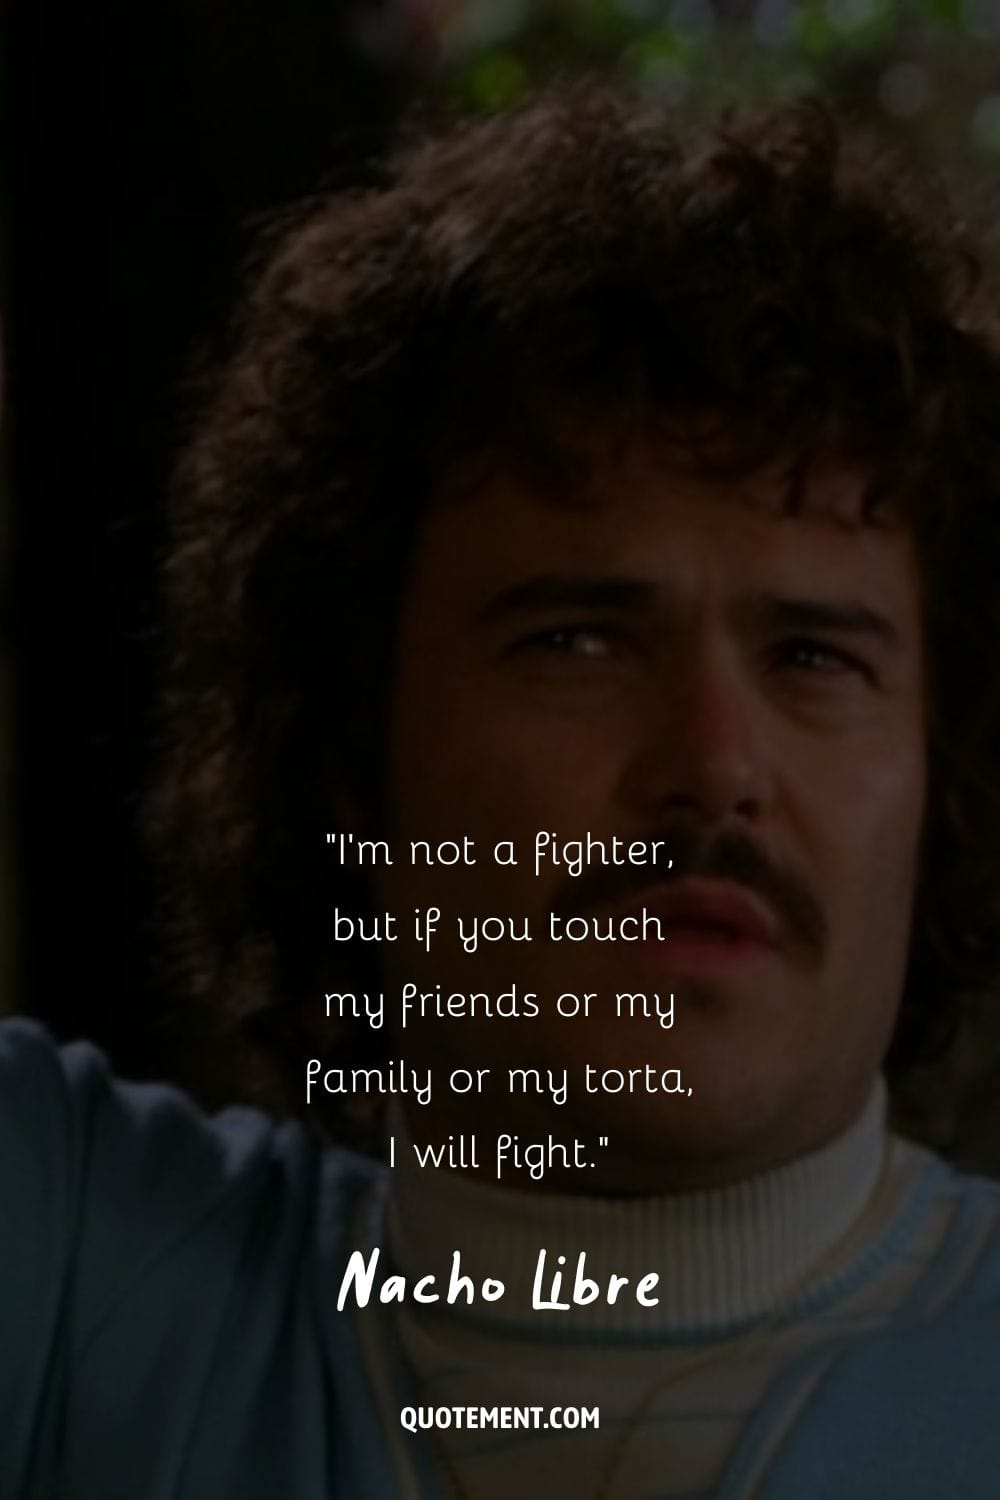 I'm not a fighter, but if you touch my friends or my family or my torta, I will fight.